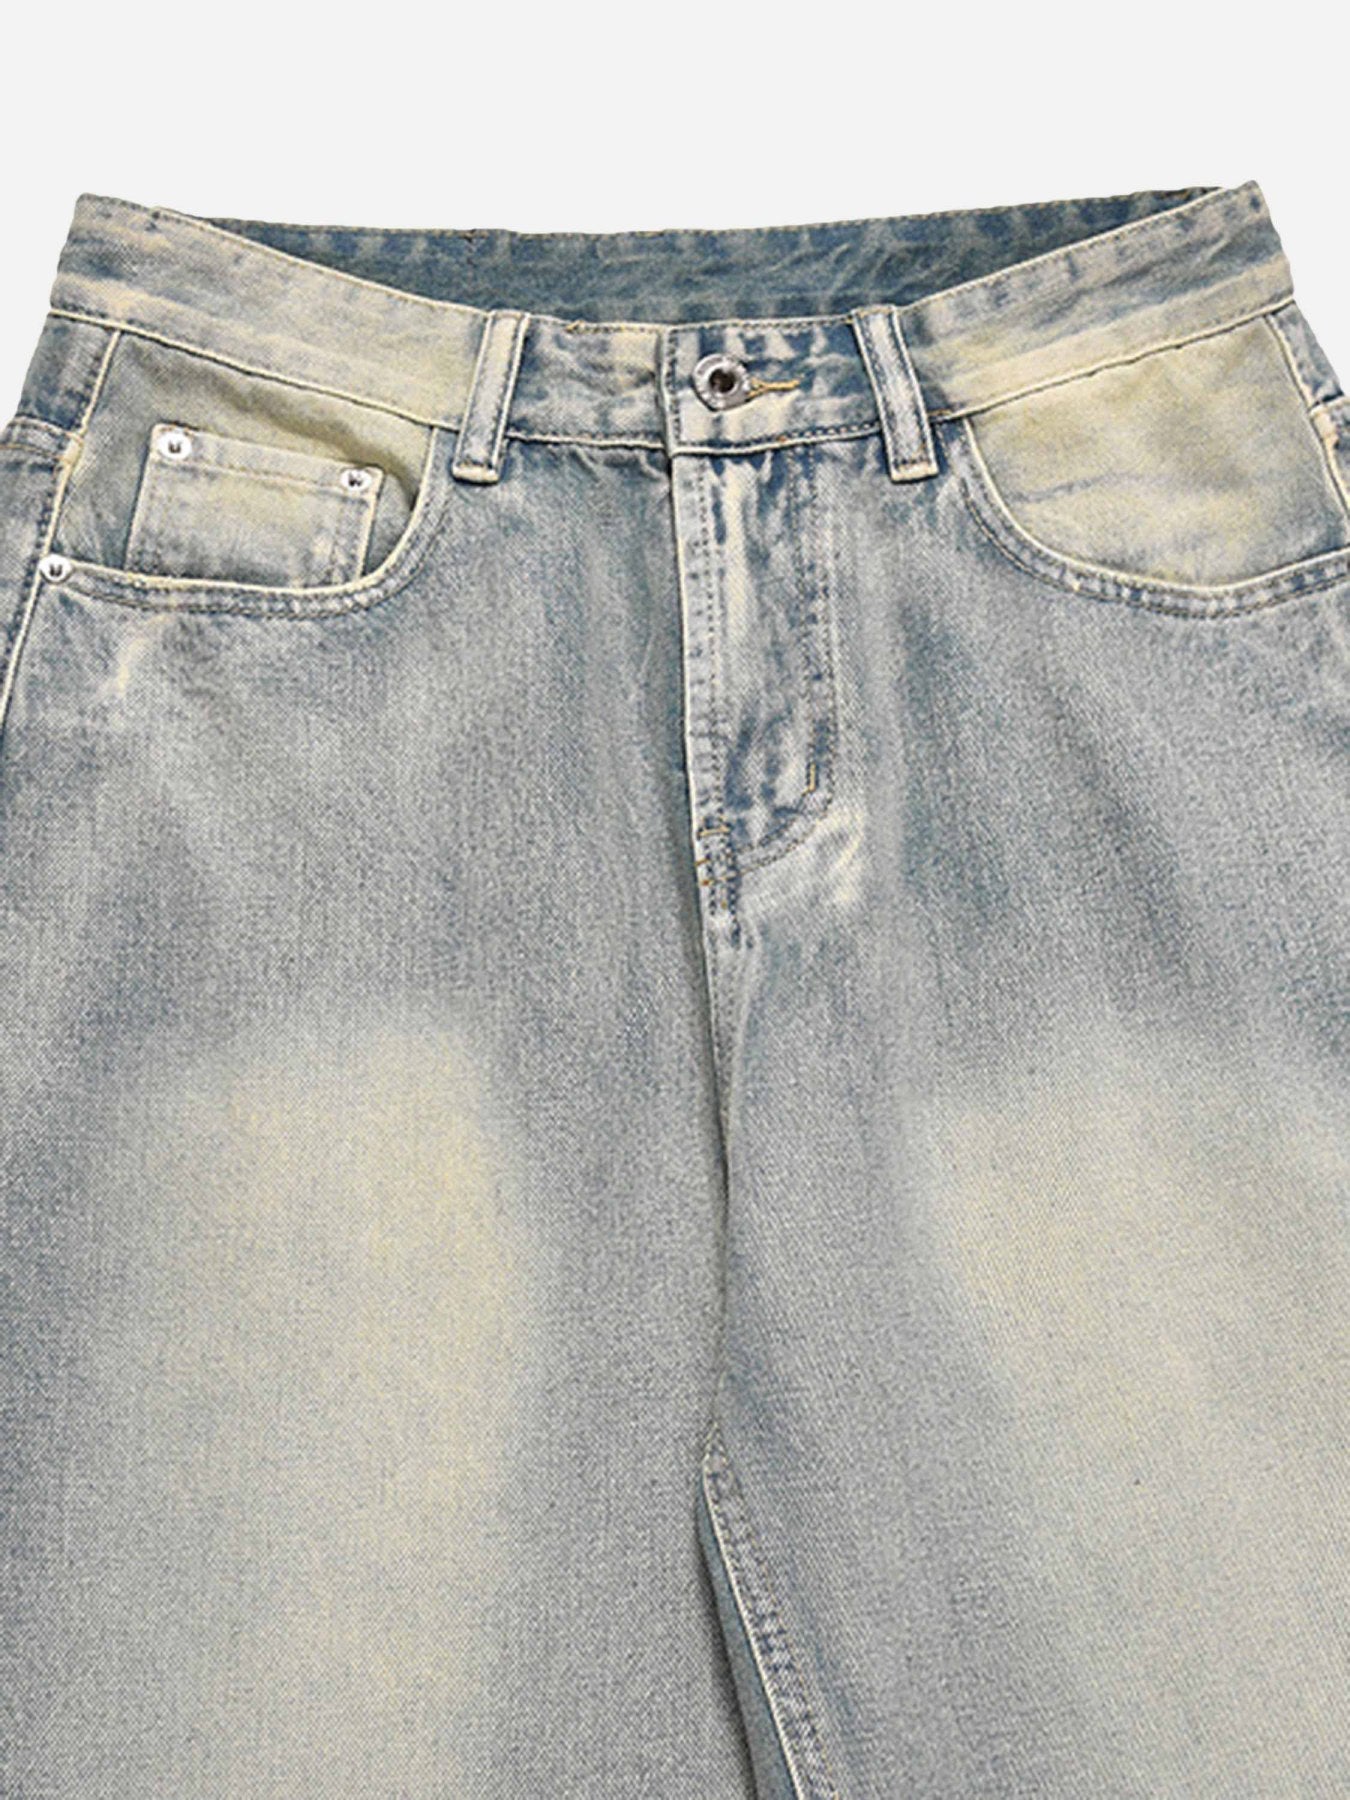 Thesupermade Washed And Worn Loose Jeans